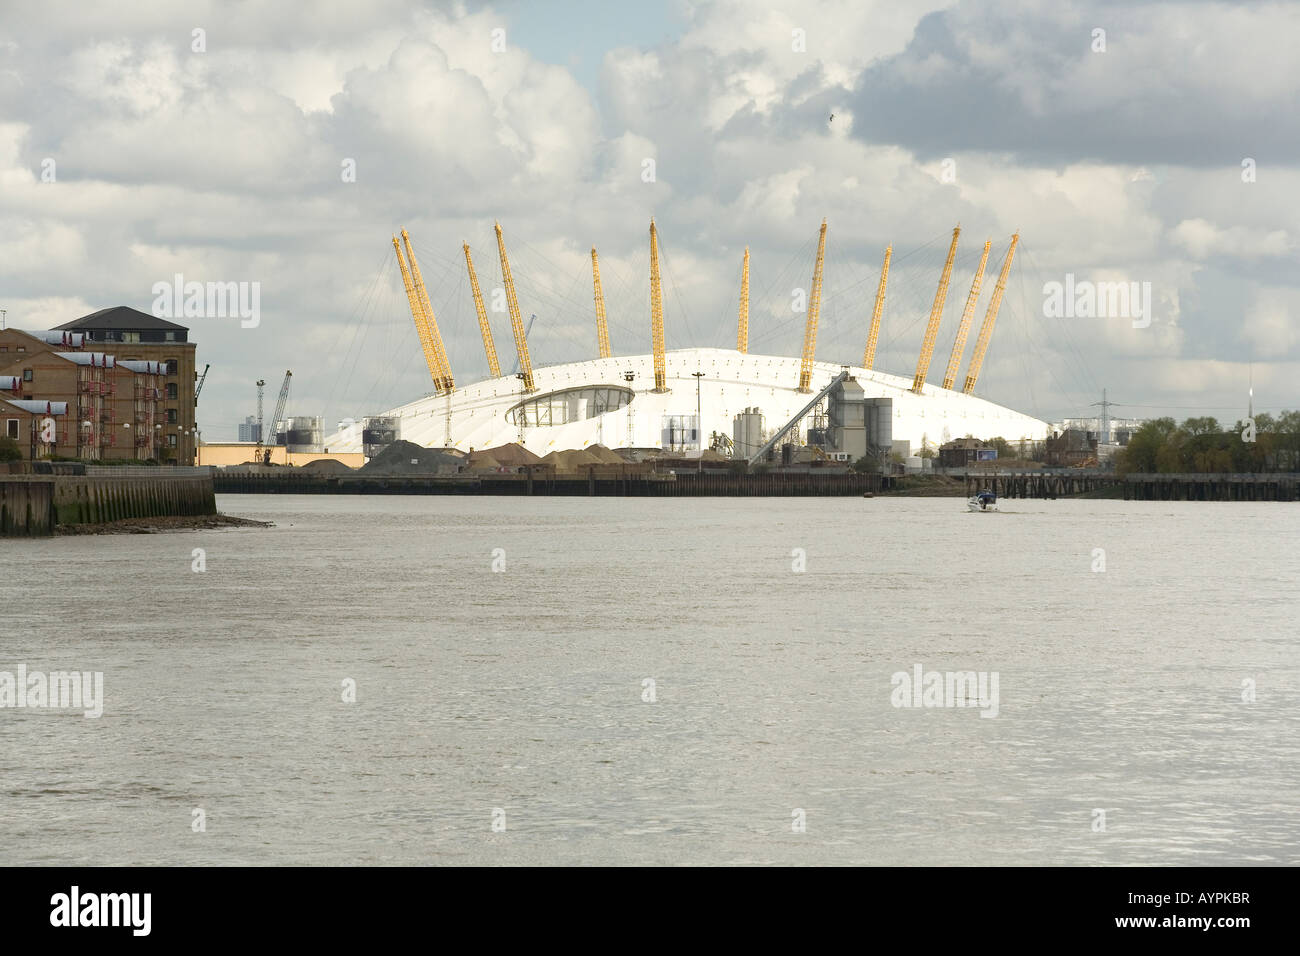 The O2 arena previously called the millennium dome, Greenwich, London. Stock Photo